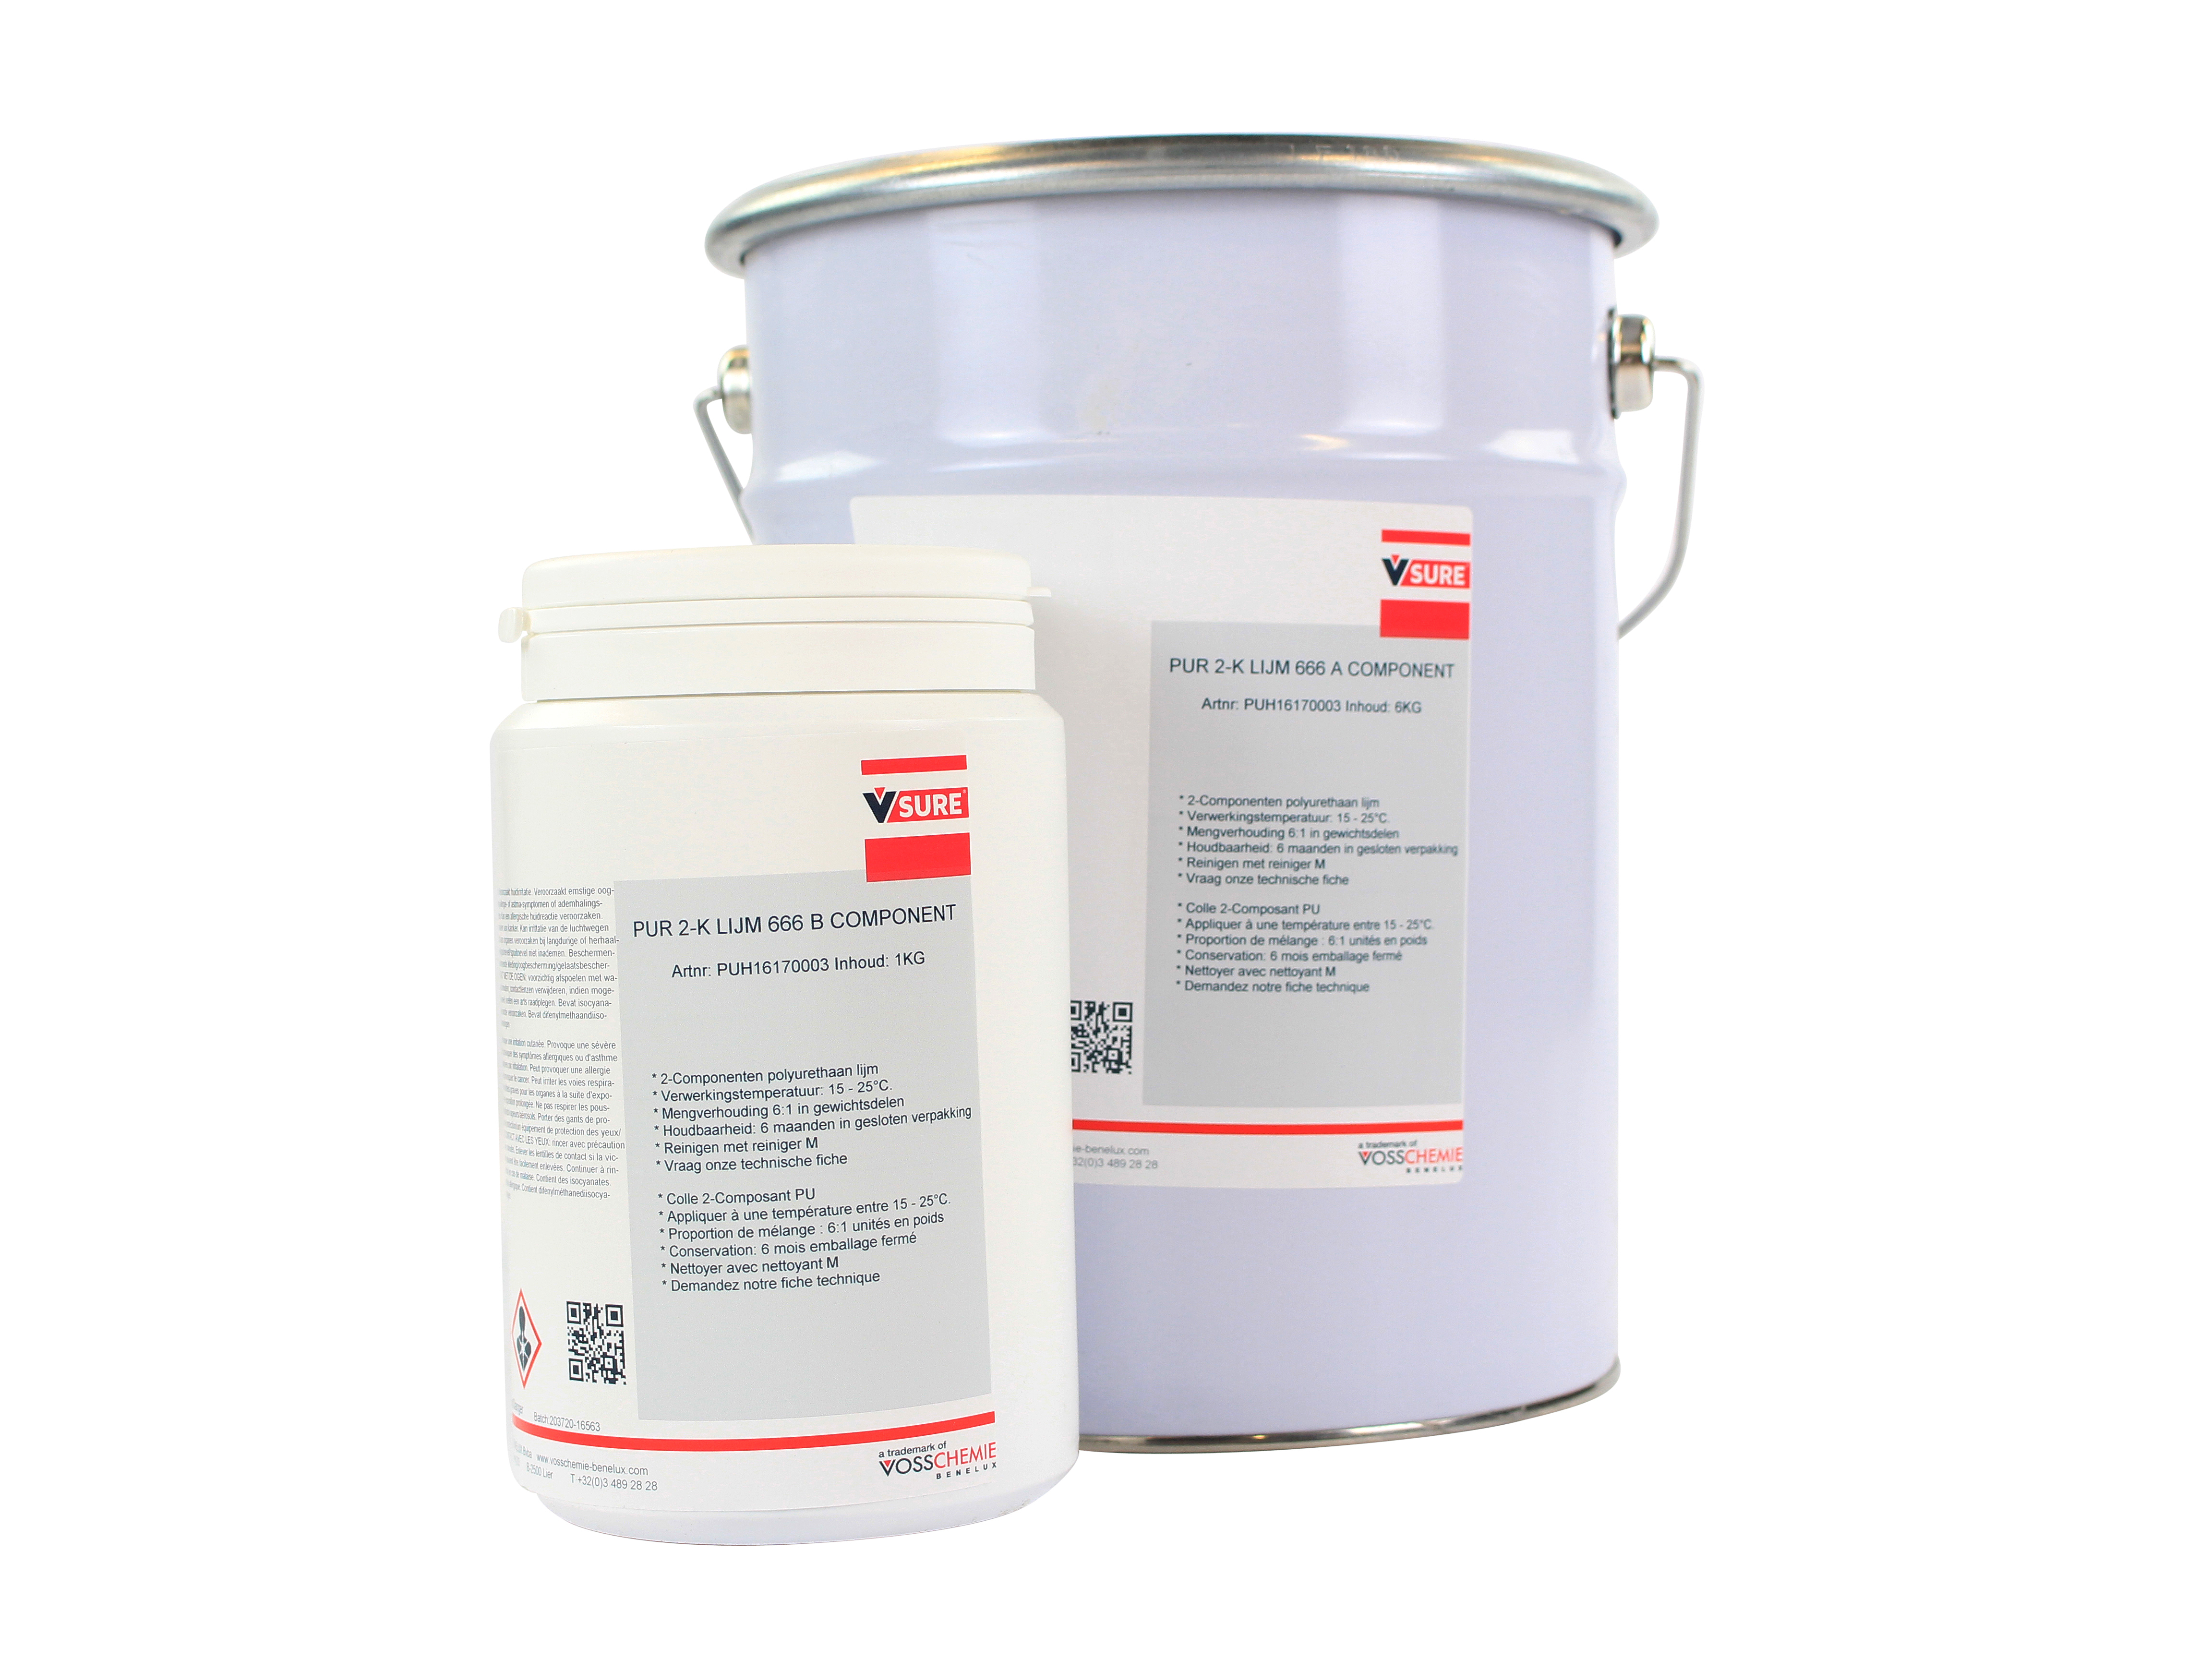 Contact adhesive - Solvent-free adhesive